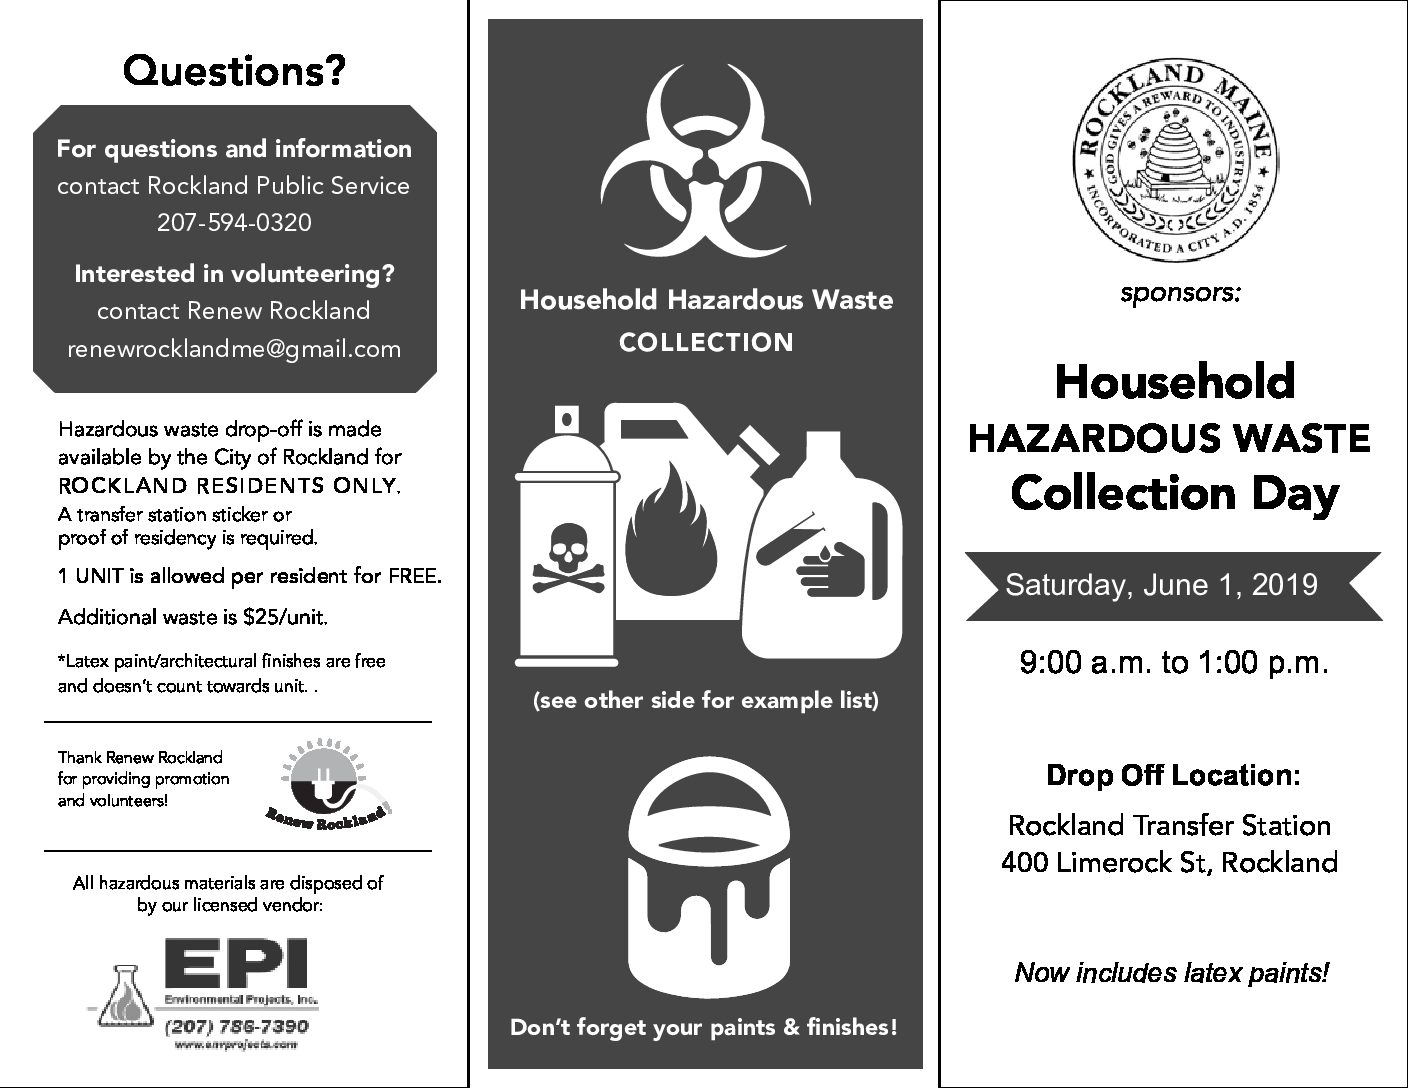 Hazardous Waste Collection Day The City of Rockland, Maine